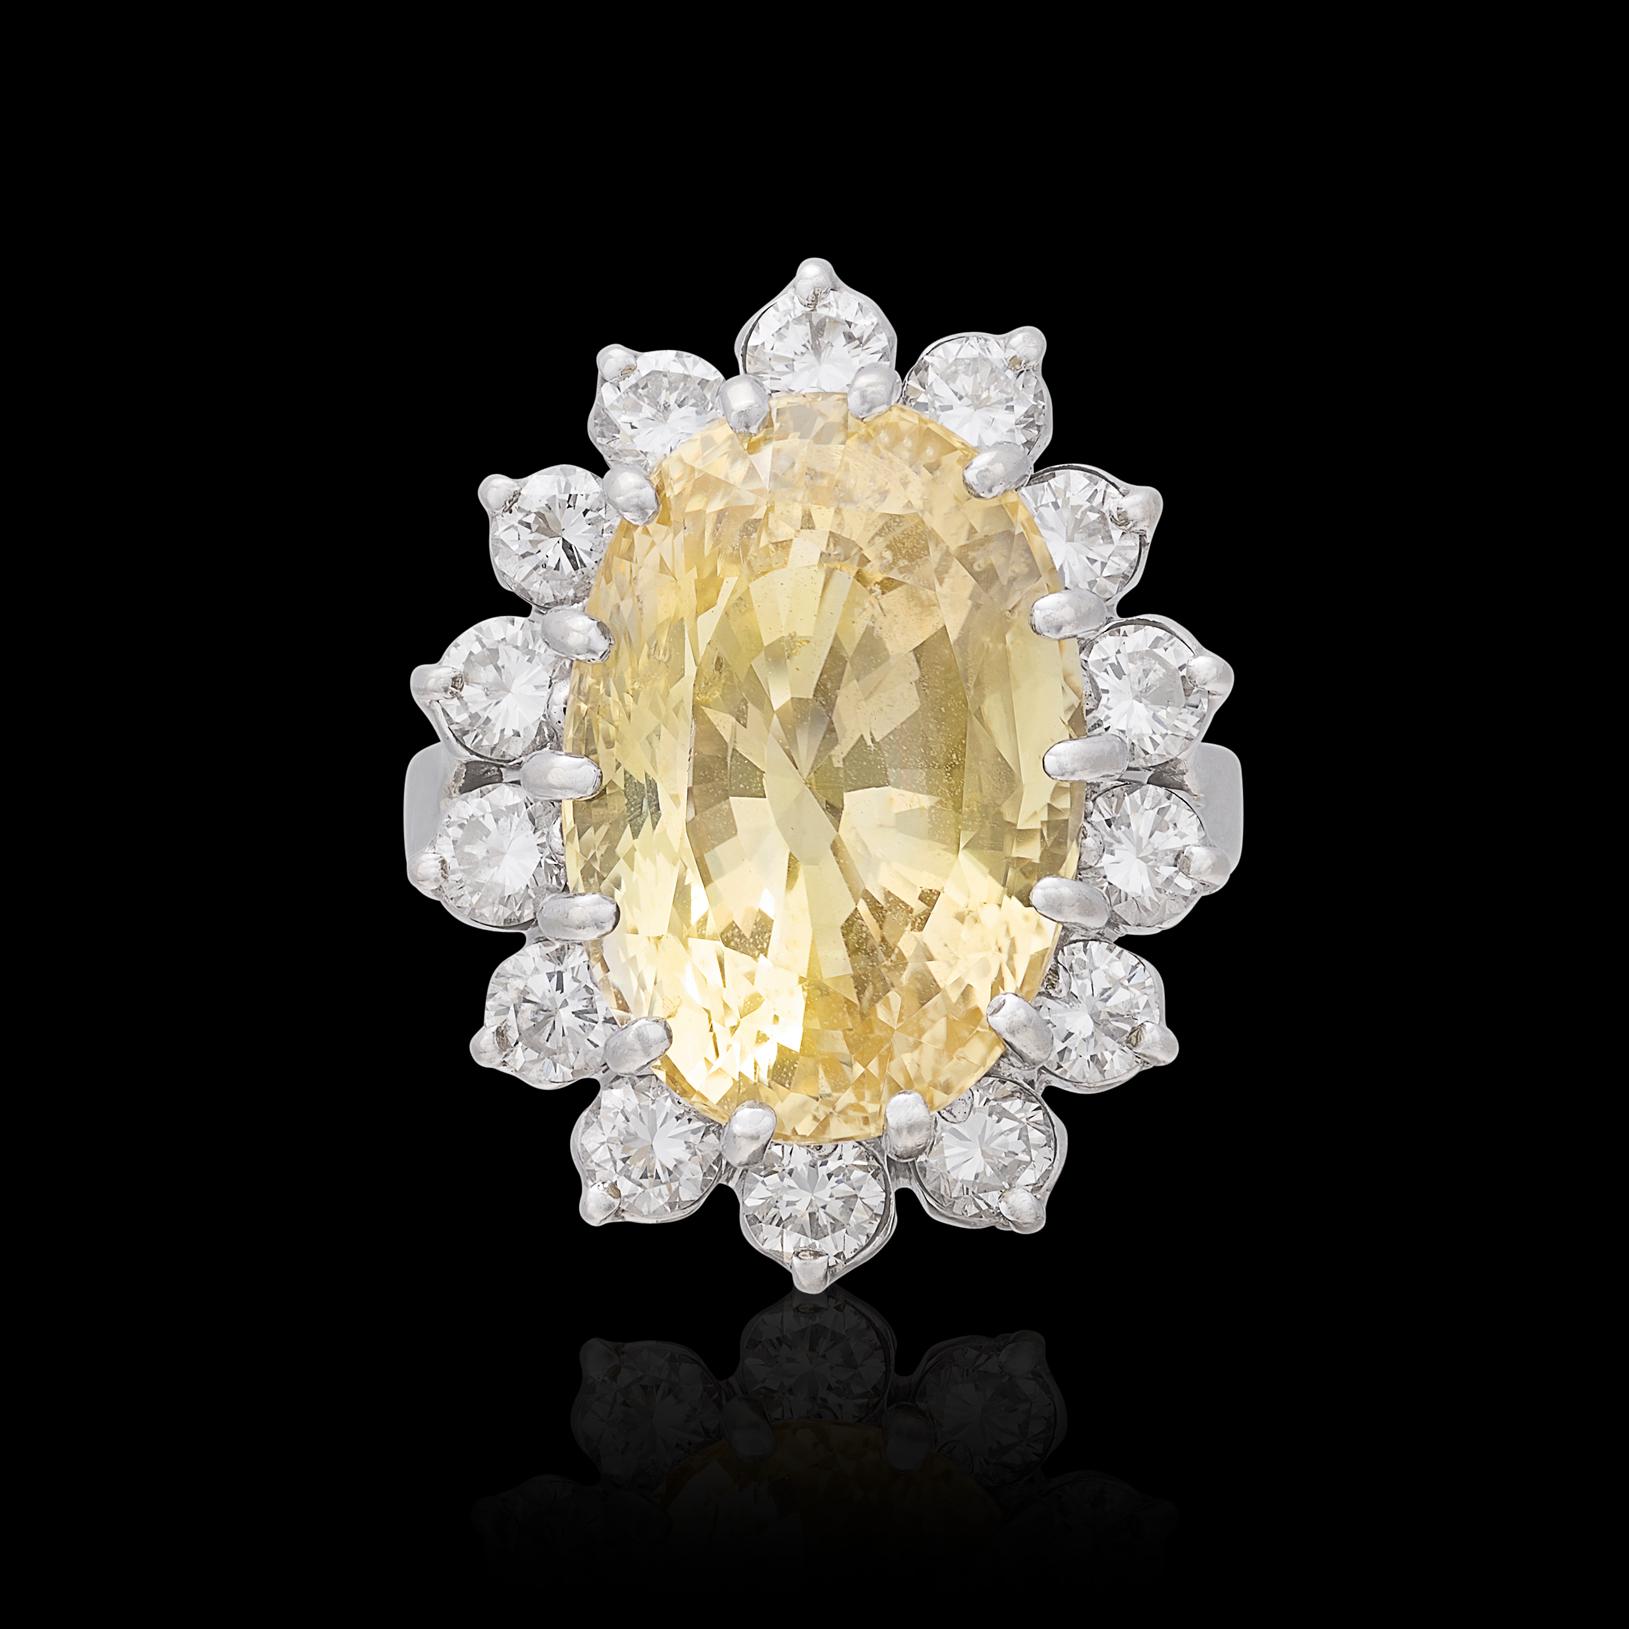 Make a statement with this stunning 14k white gold ring that features a phenomenal yellow sapphire surrounded by a halo of sparking round diamonds. The well-saturated oval yellow sapphire weighs approximately 16 carats and the total diamond weight